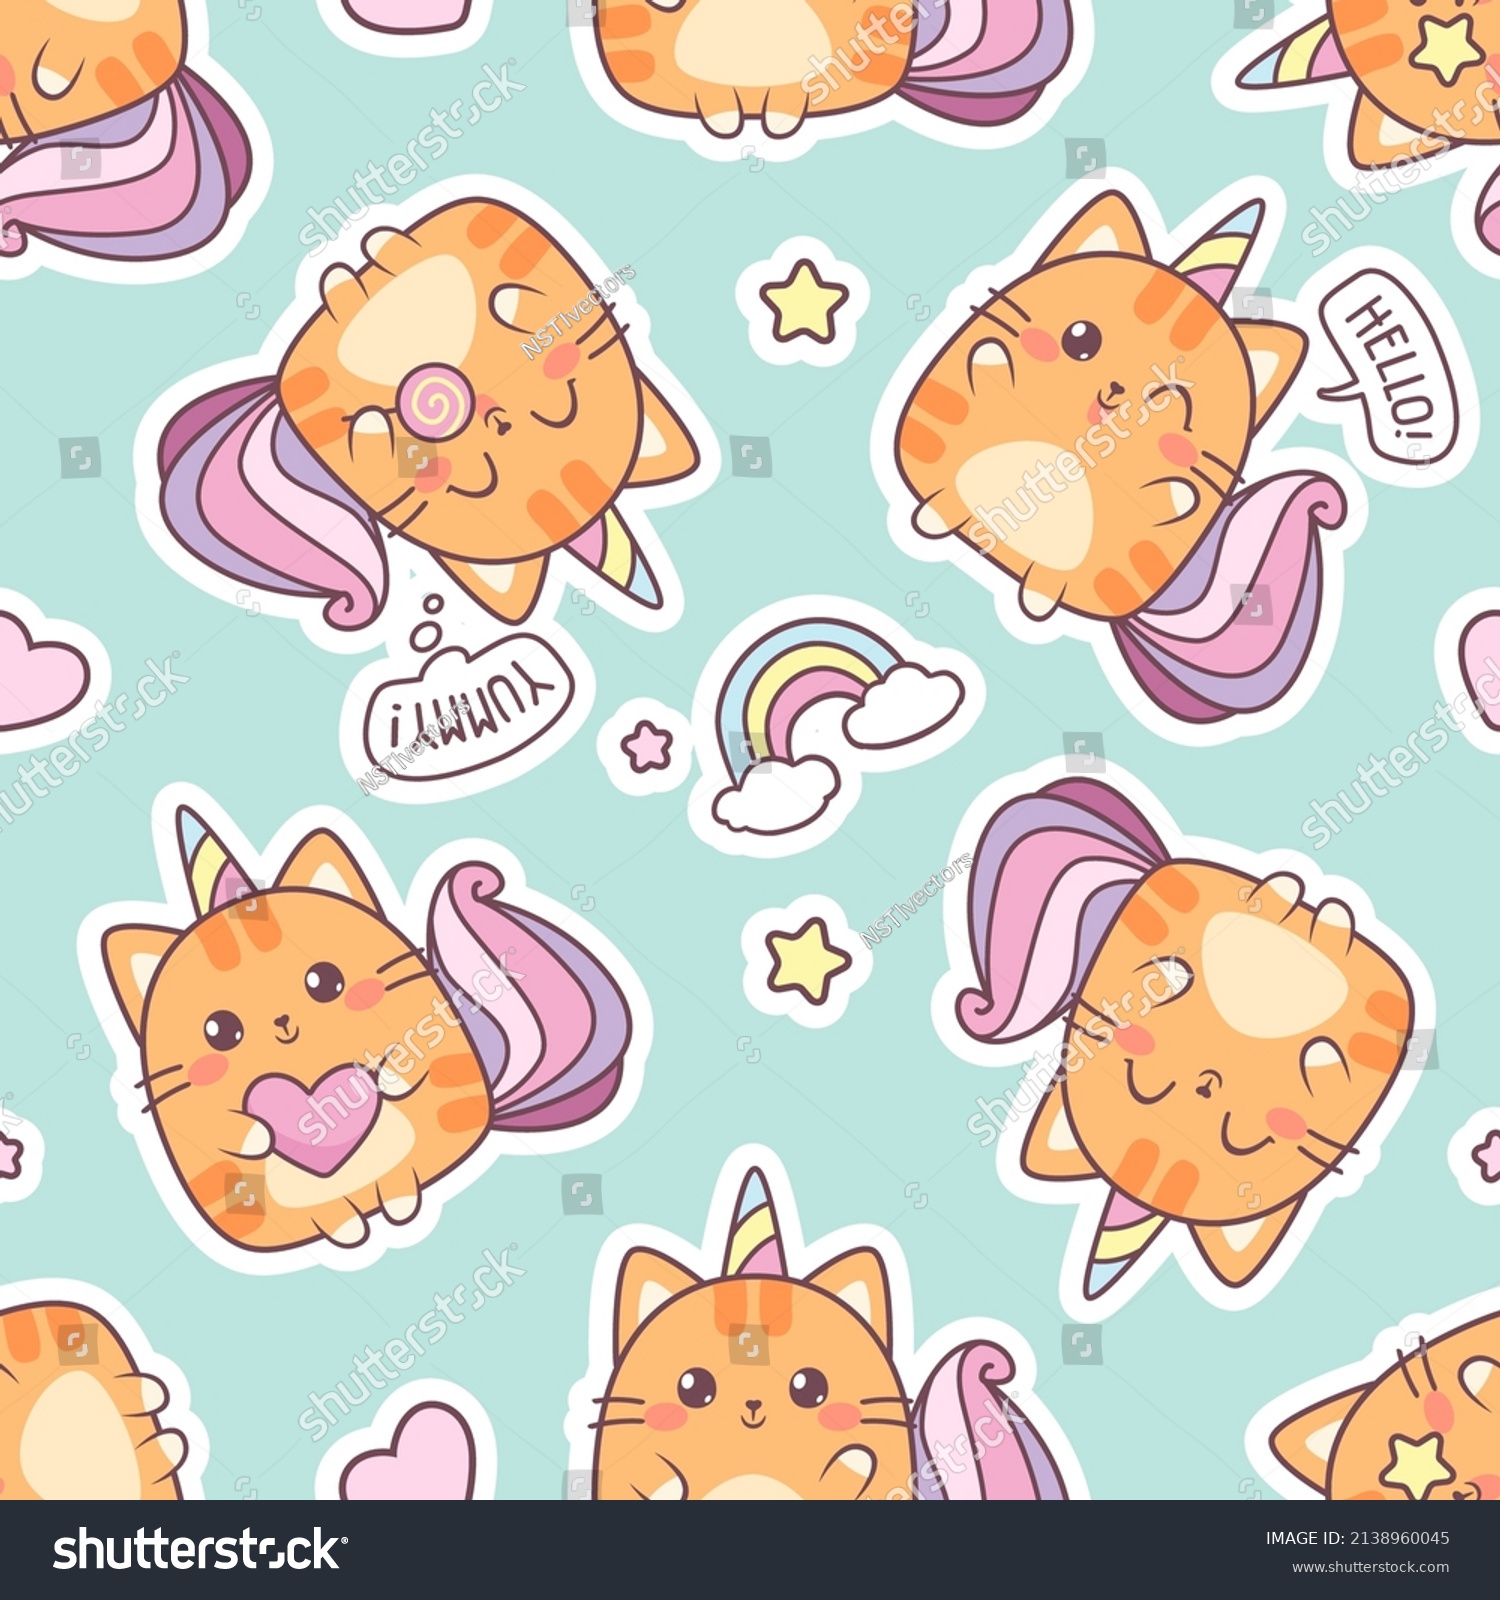 SVG of Cute Red Cat Caticorn or Kitten Unicorn vector seamless pattern. Kawaii Cat Unicorn with lollipop. Isolated vector illustration for kids design prints, posters, t-shirts, stickers svg